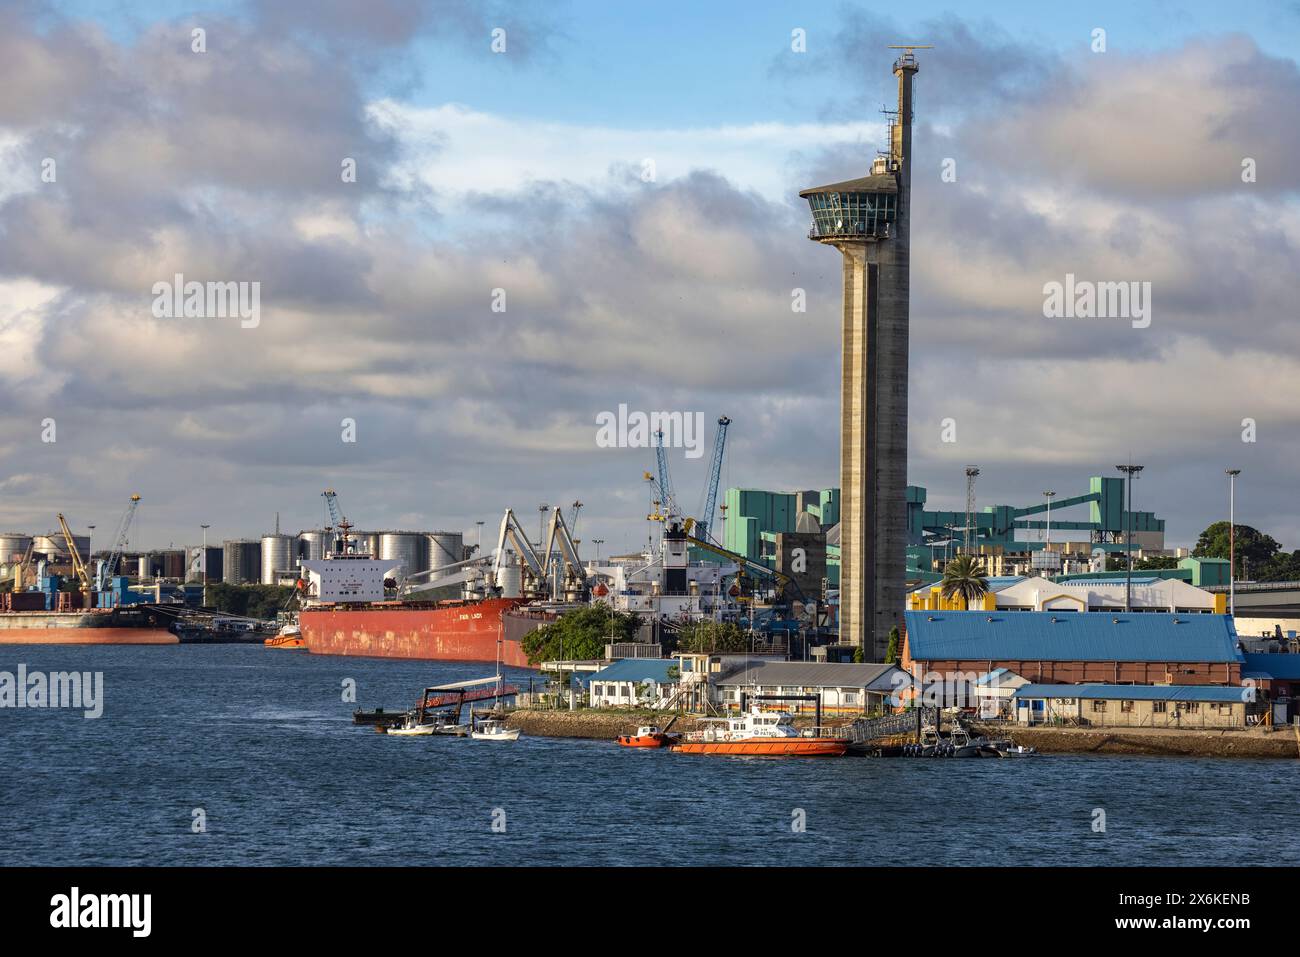 70m high port control tower and cargo ships, Mombasa, Kenya, Africa Stock Photo